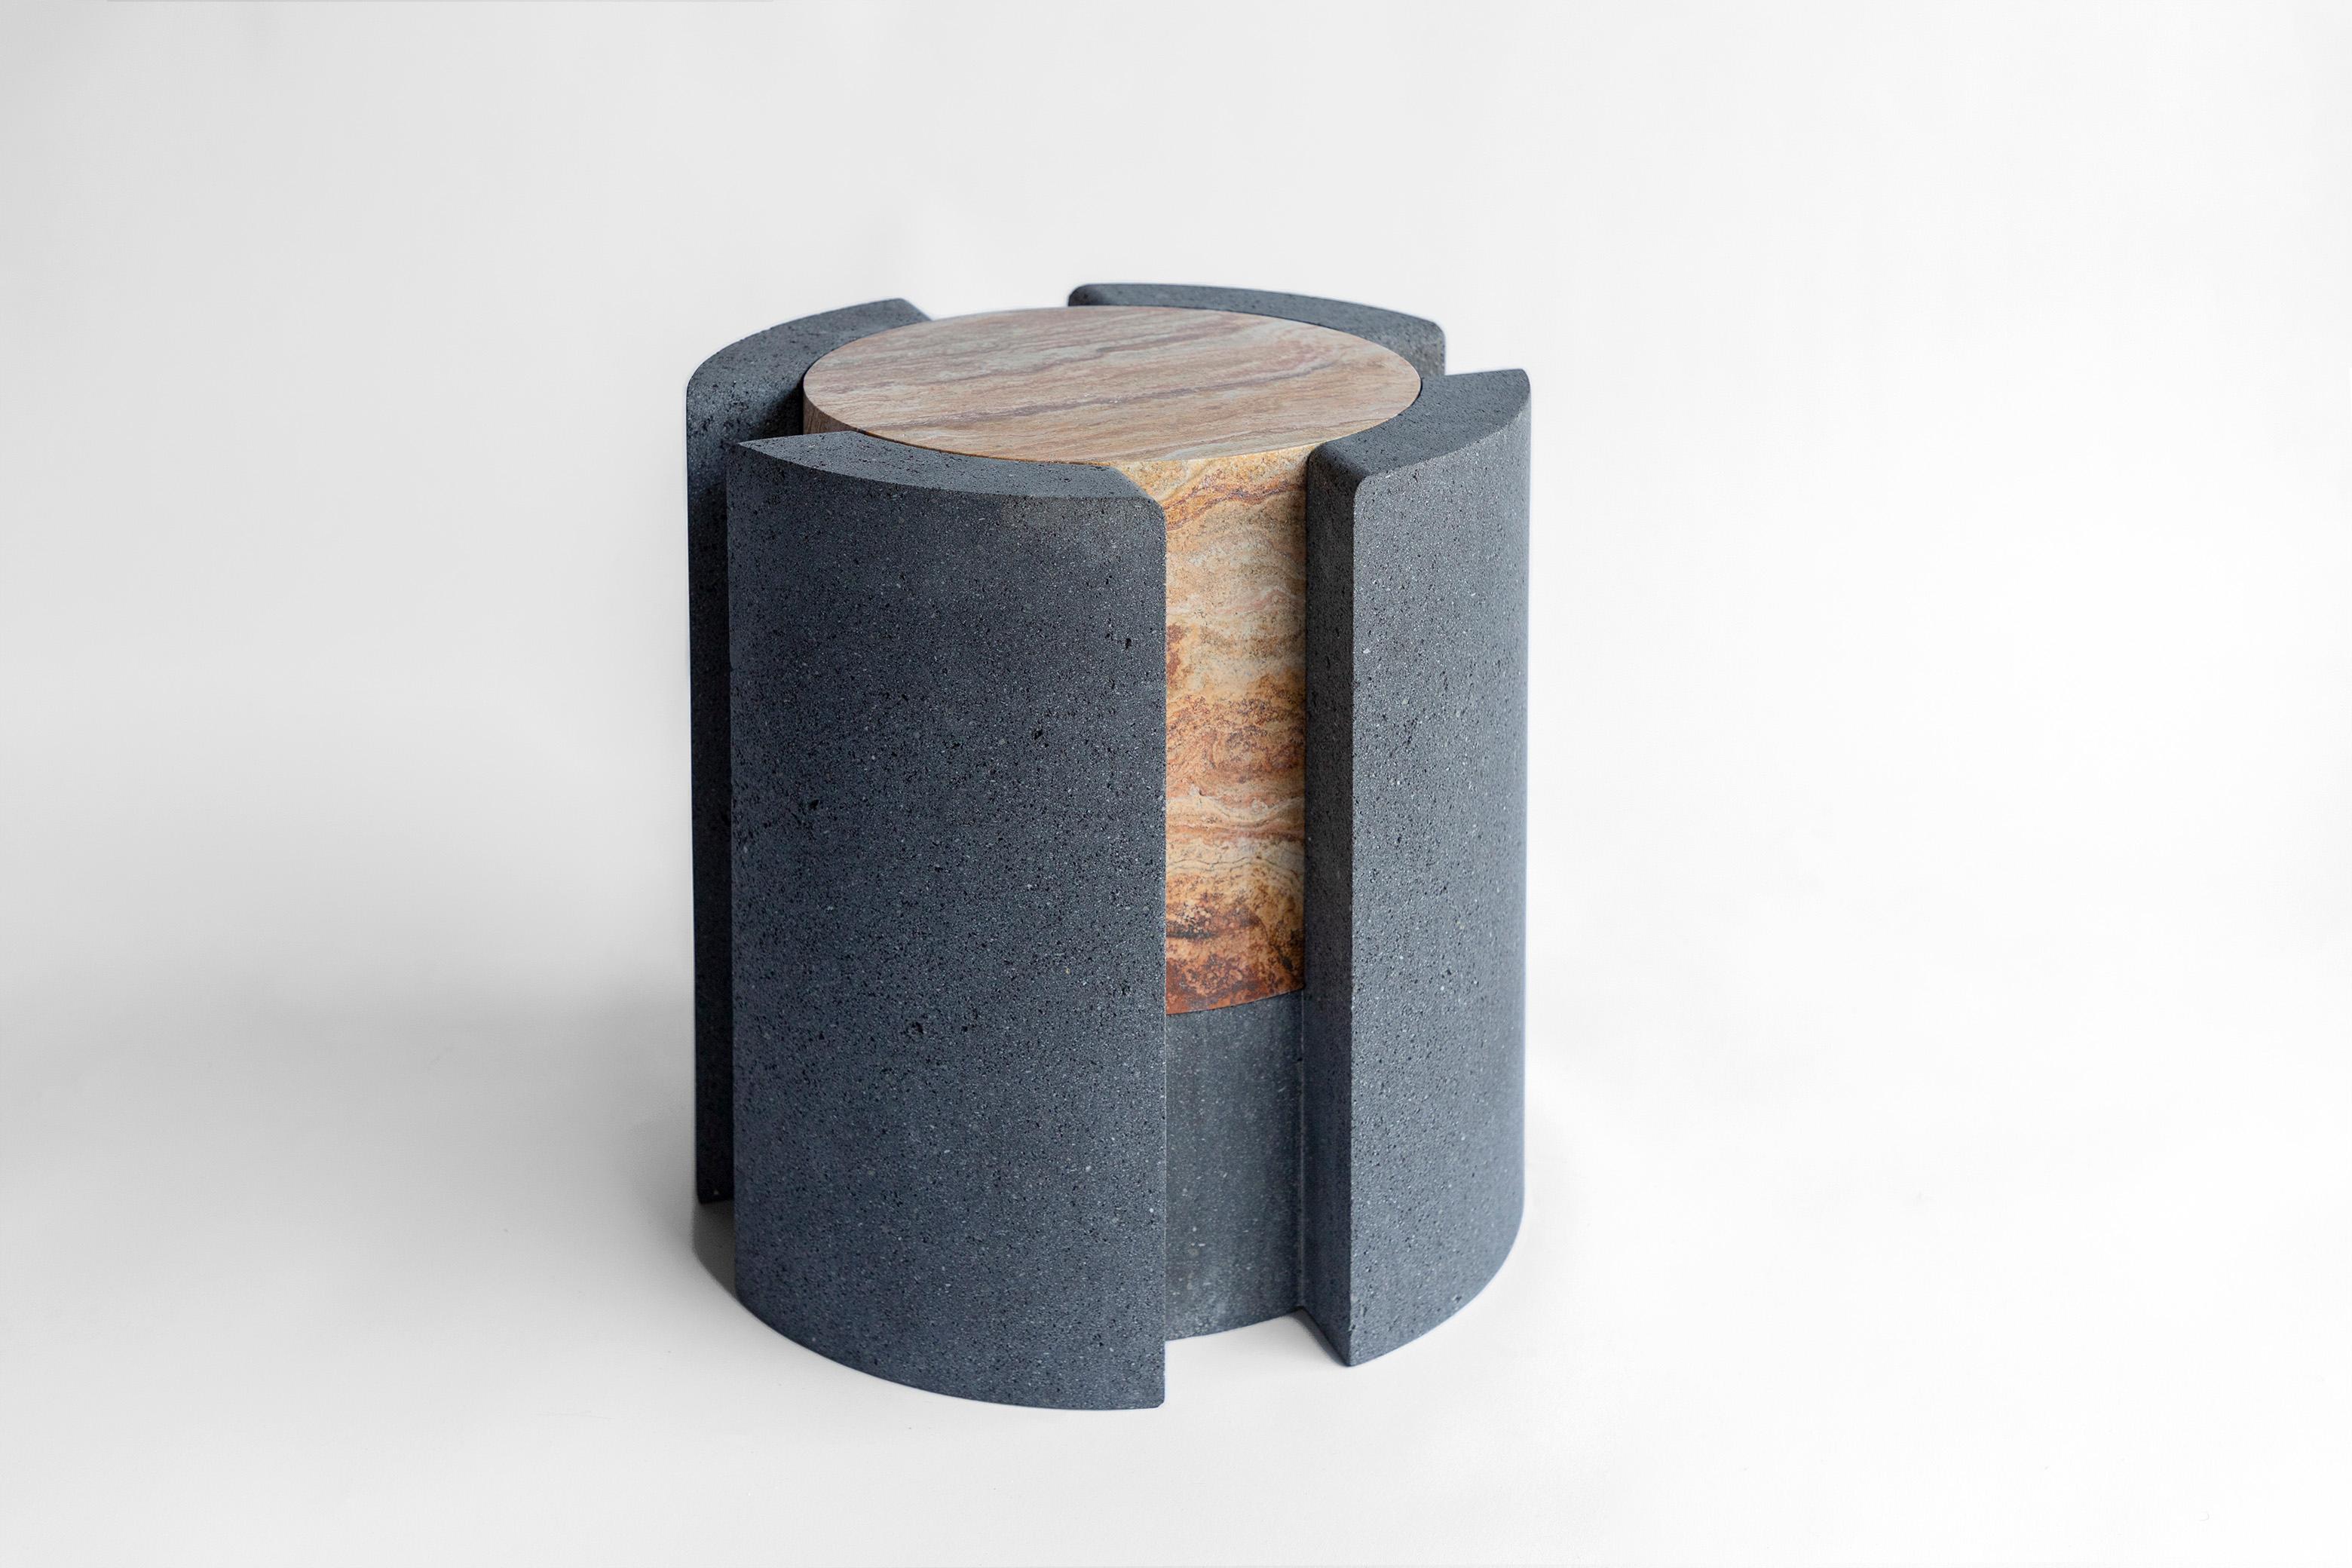 Stone Volcanic Shade III Stool/Table by Sten Studio, Represented by Tuleste Factory For Sale